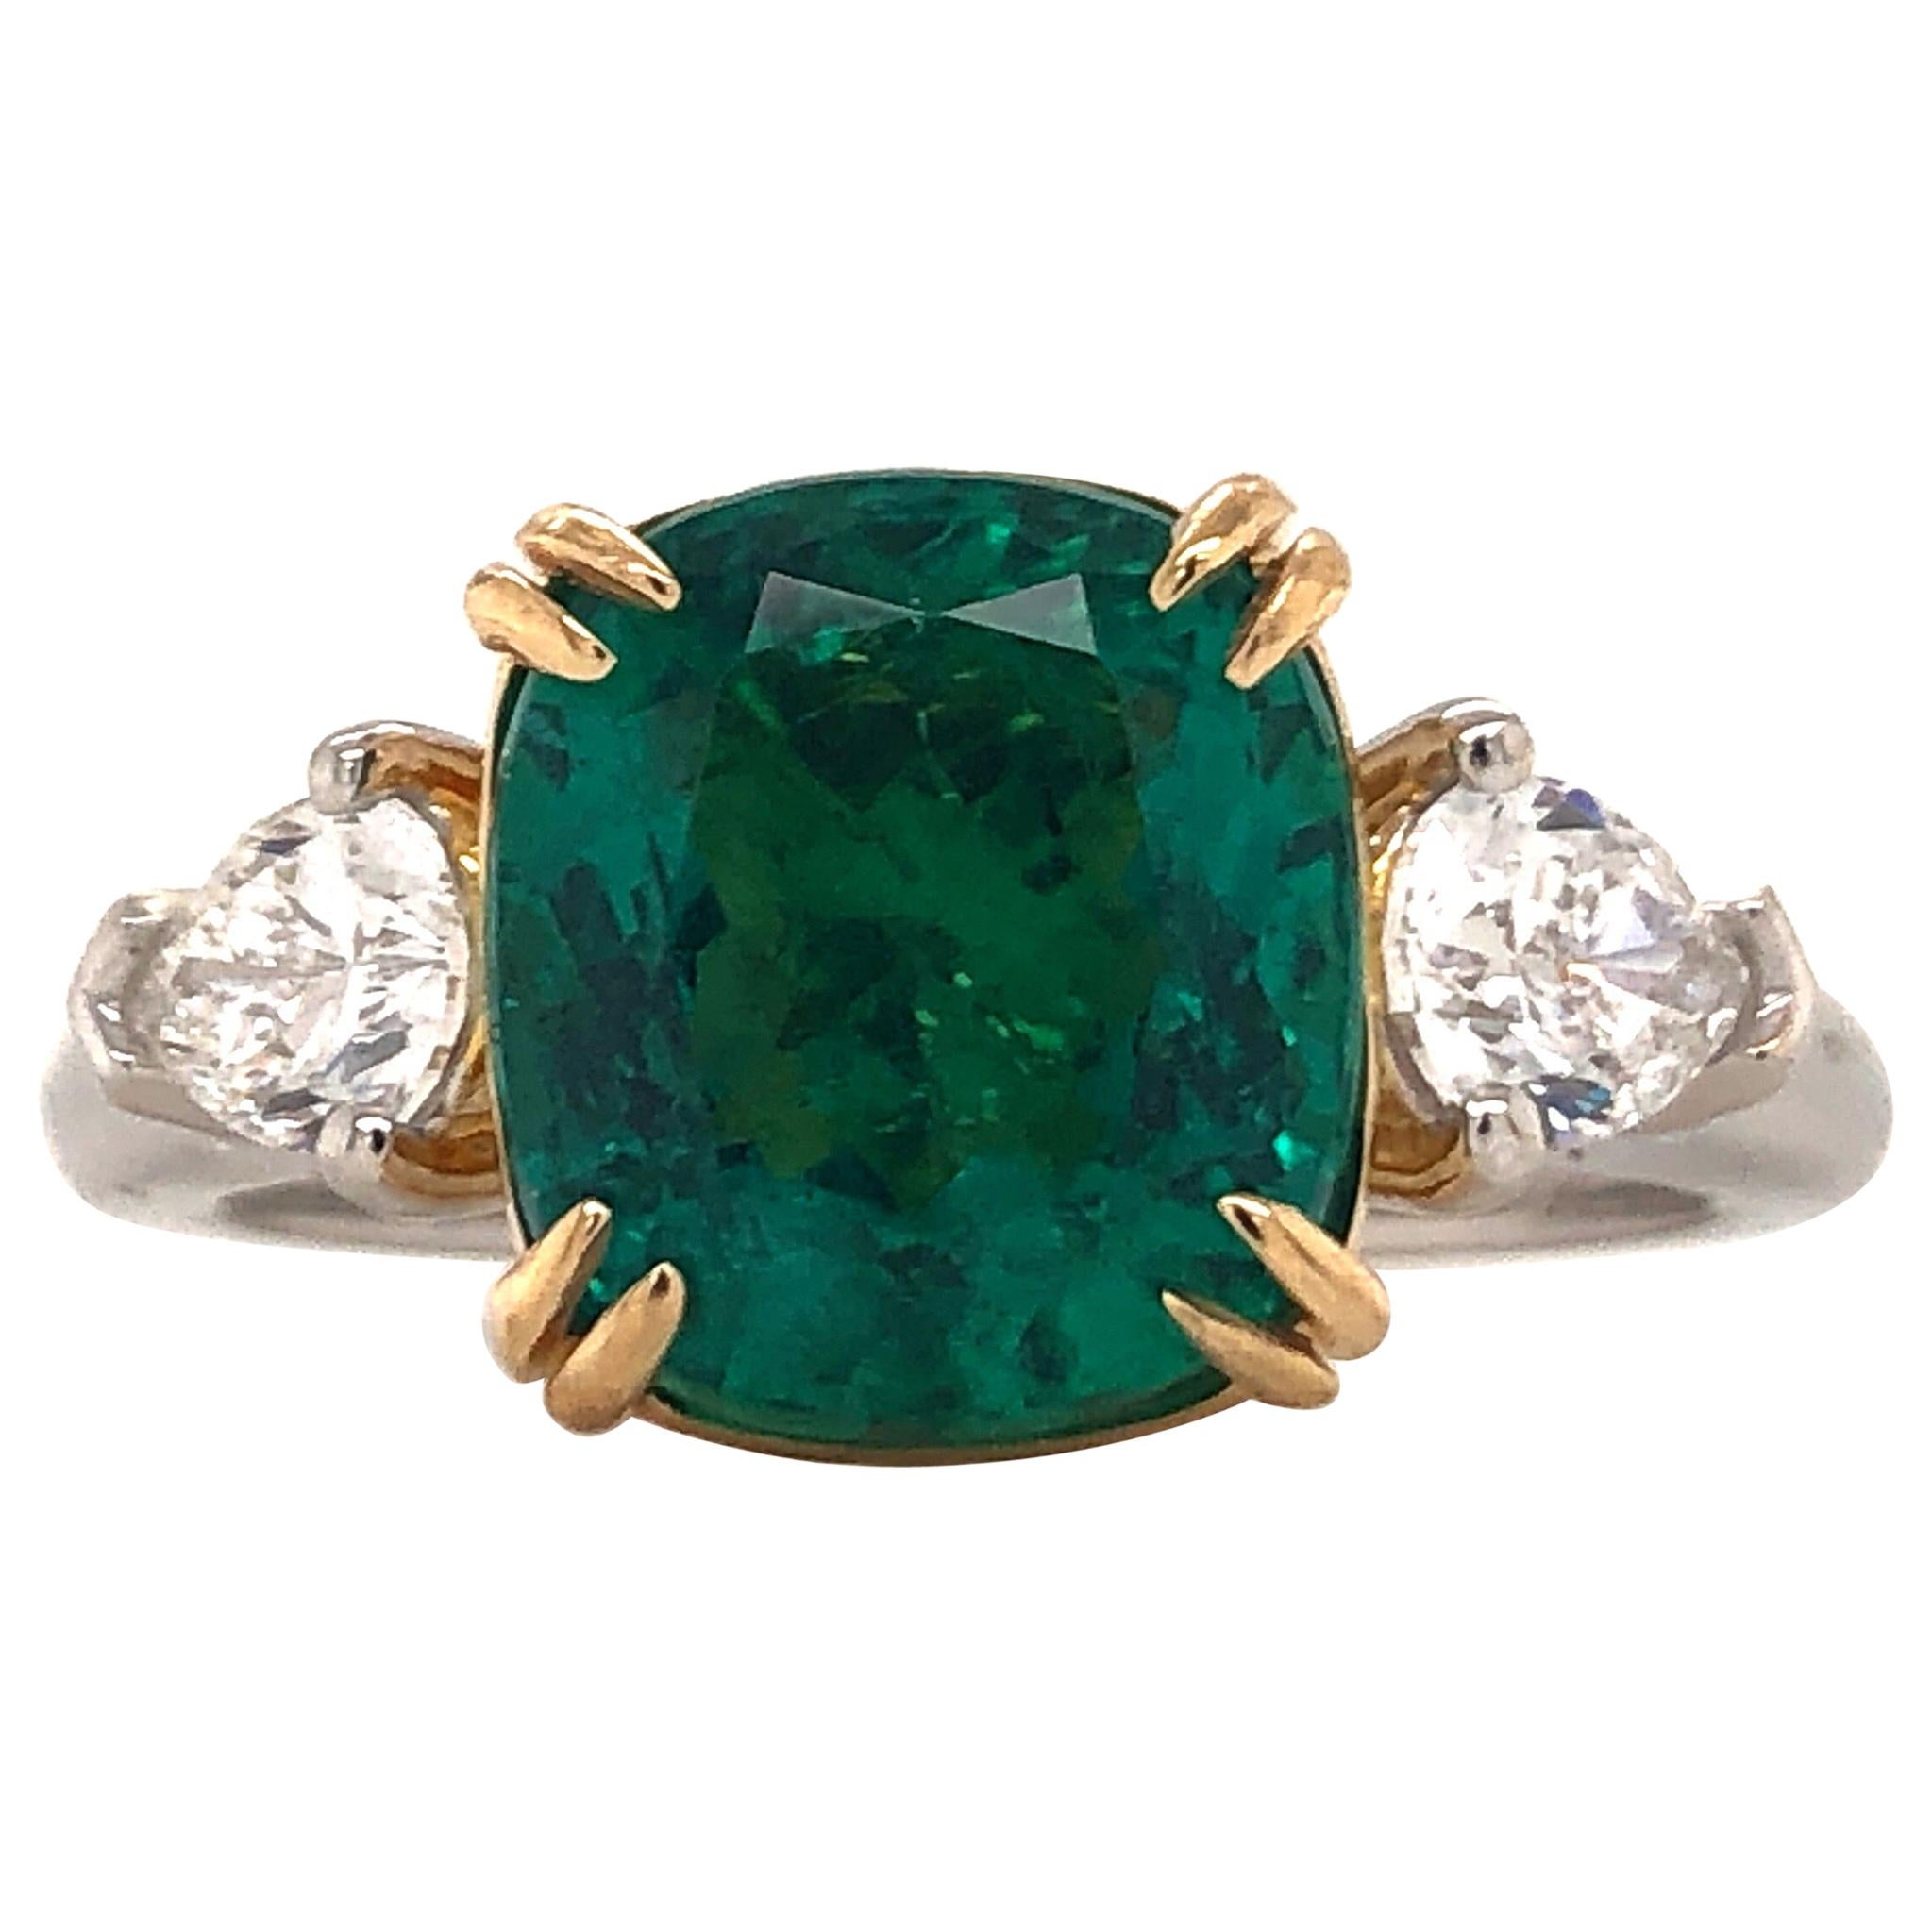 Showcasing a cushion shape 3.57ctct Genuine Emerald certified by C.Dunaigre. 
Origin: Zambian 
Color: Medium green 
Clarity: Based on emerald grading methodology the clarity of the emerald is Internally flawless-vvs1 with no imperfections visible to